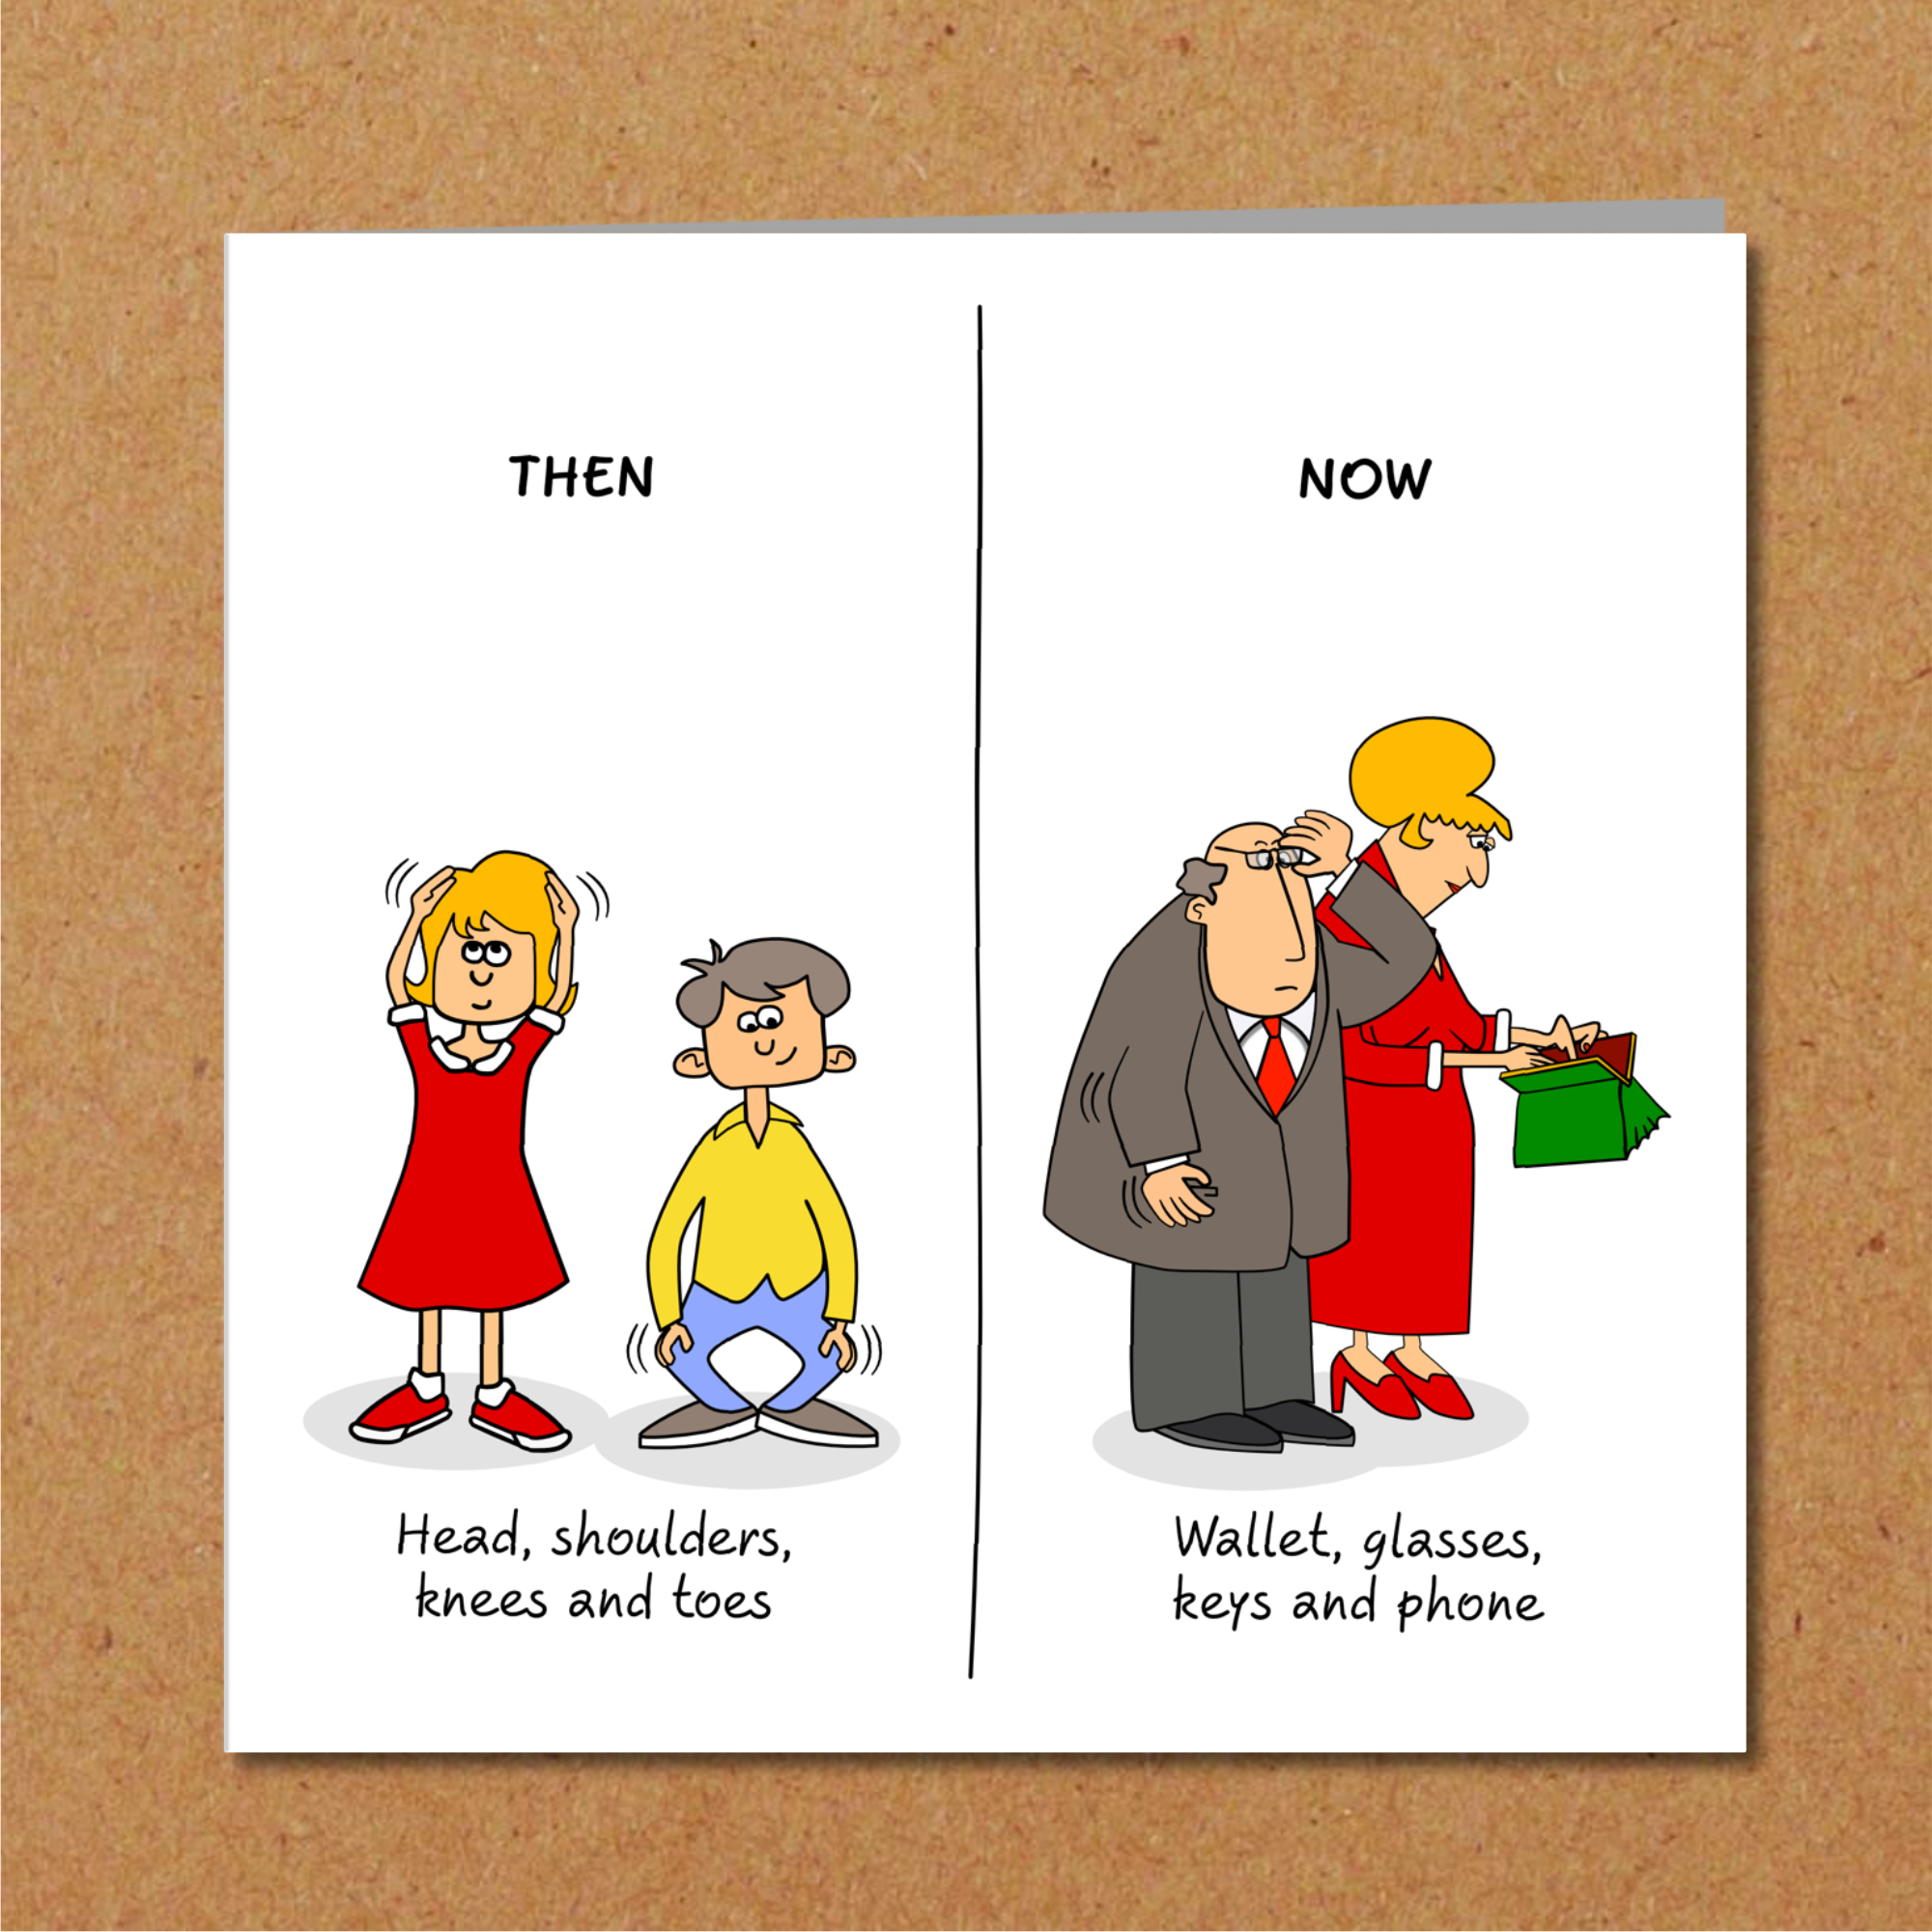 Funny Birthday card 40th 50th 60th Birthday for Wife Husband Mum Dad Father Mother Grandmother Grandad - Old aged age - Funny, humorous and fun